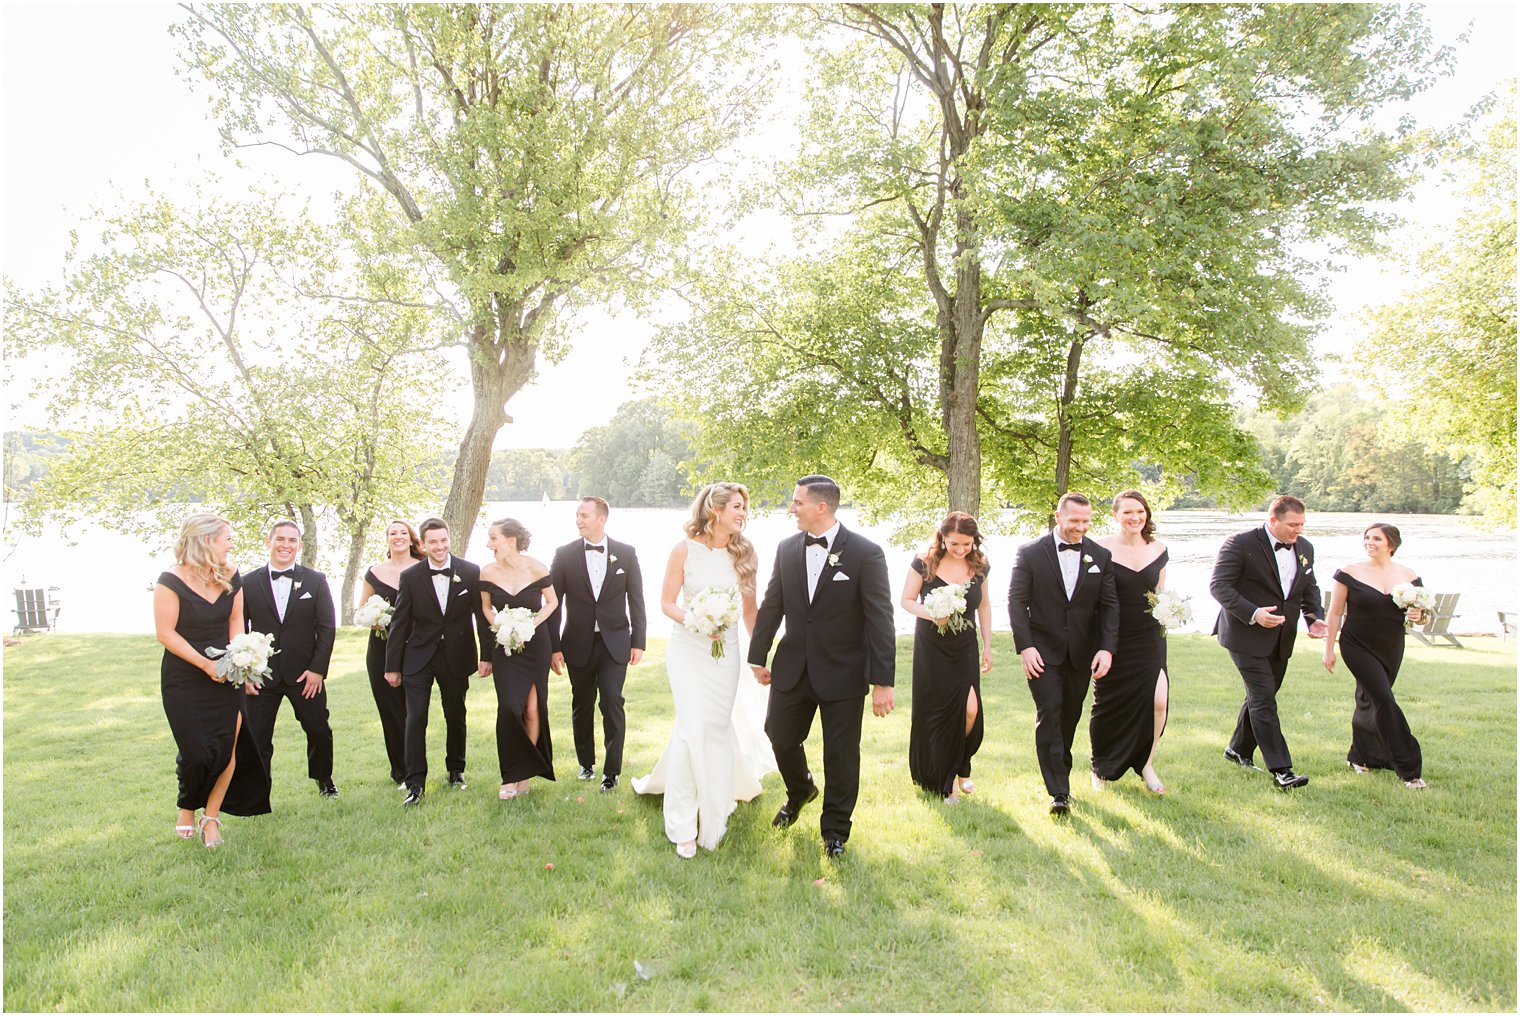 bridal party photo at Indian Trail Club in Franklin lakes NJ